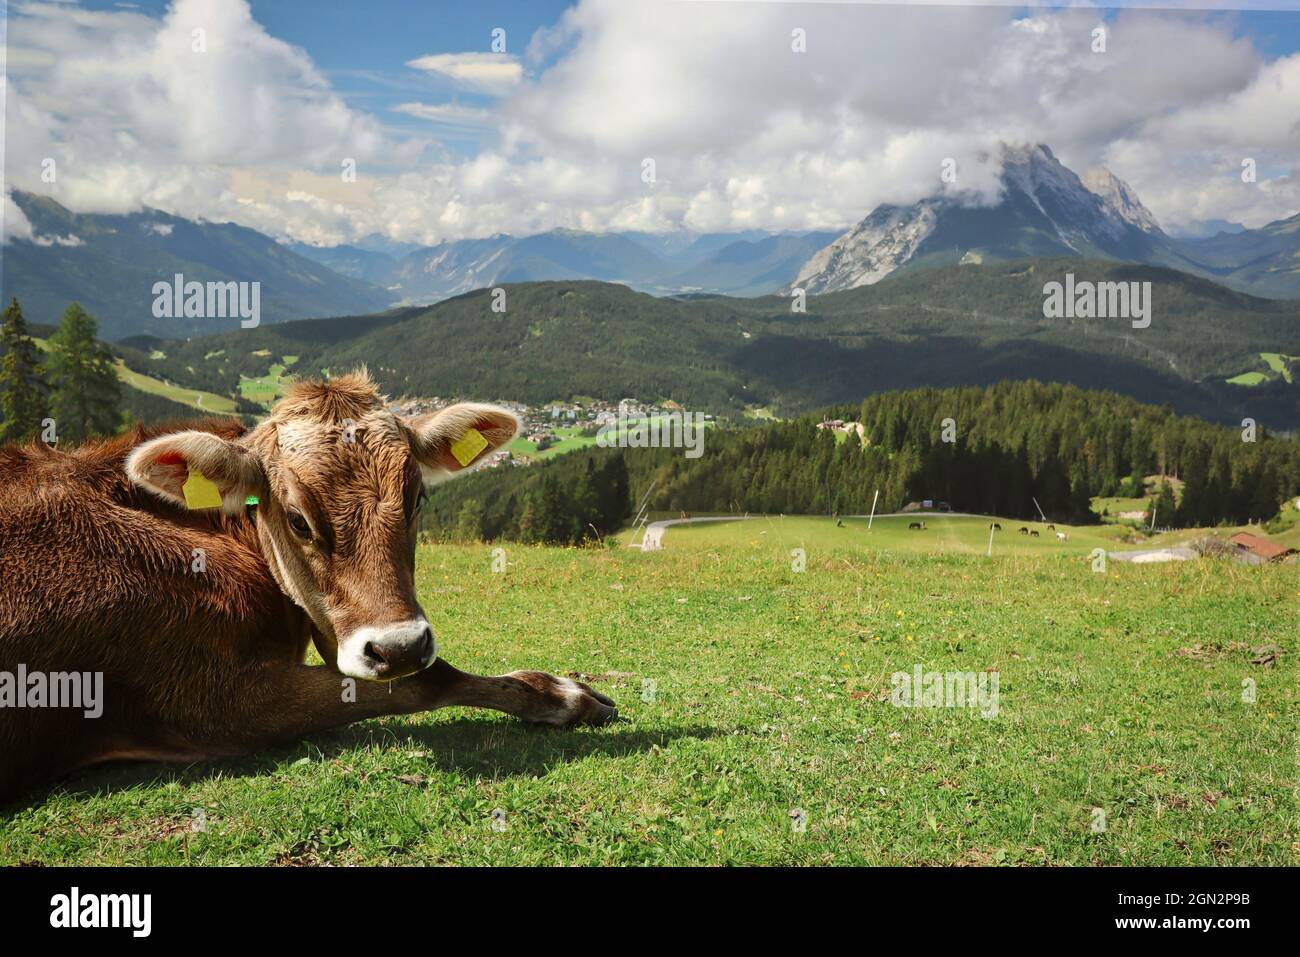 Brown Young Cow in Seefeld Mountains. Cute Domestic Cattle with Scenic Alpine View in Tyrol. Stock Photo